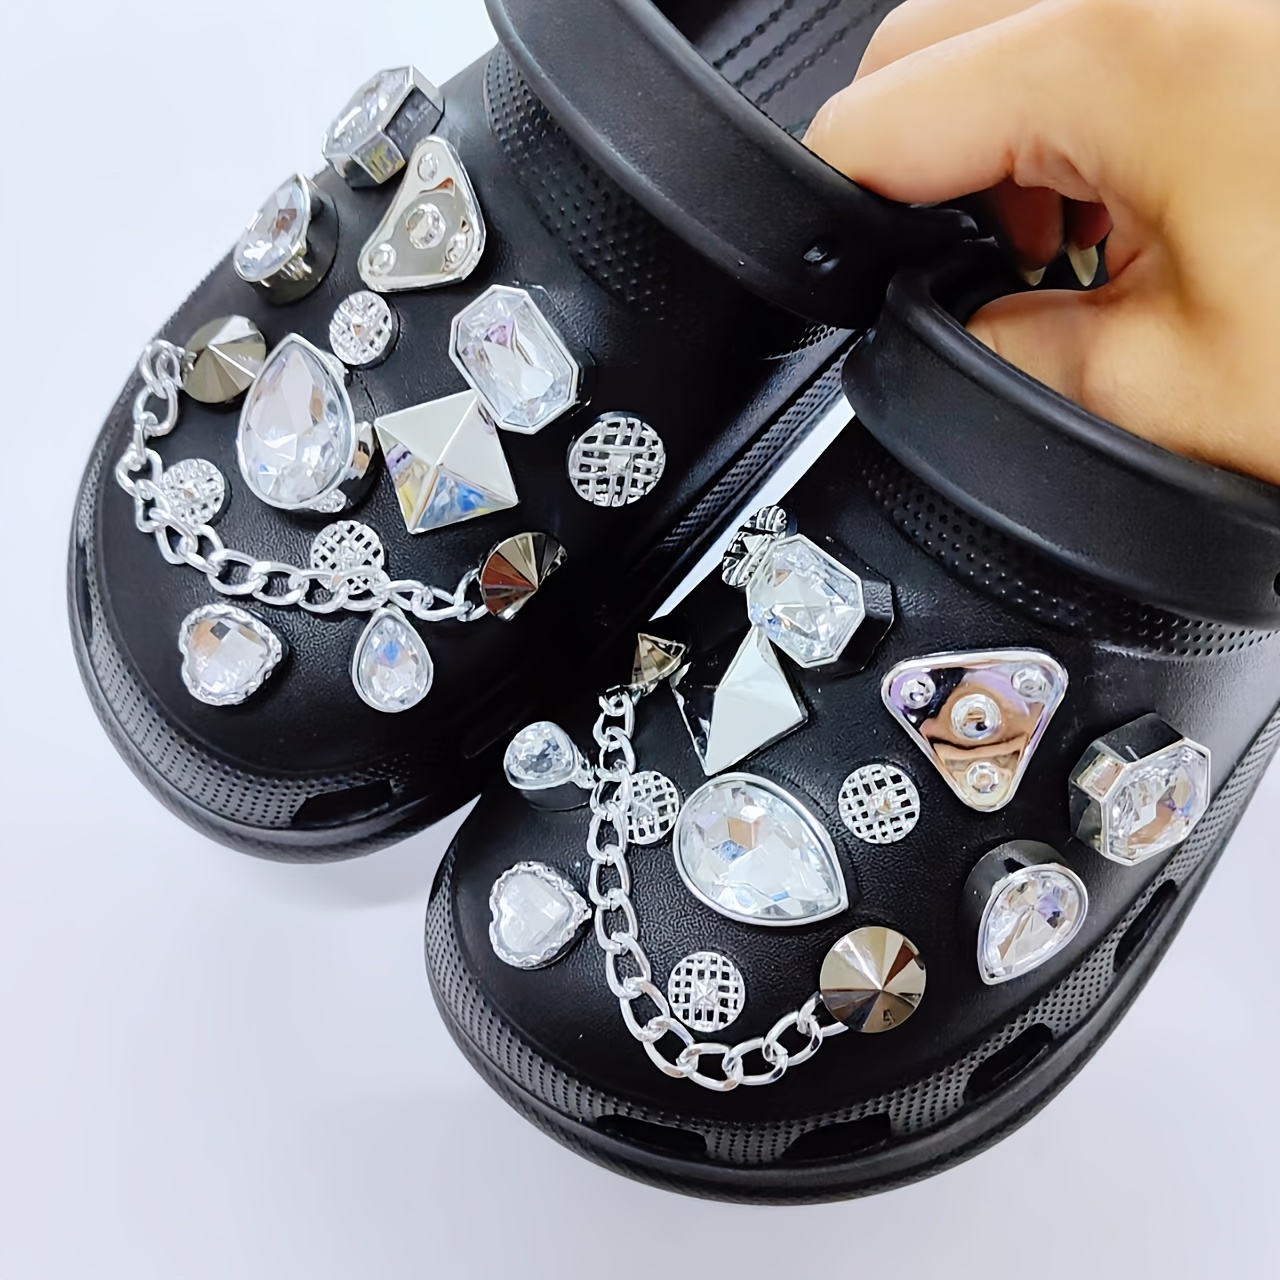 24PCS Lovely Shoe Charms for Shoes,Bling Bling Crystal Diamond Shoe Charms  for Ladies,Jewelry Fashion Shoe Decoration Charms Fits Clog Sandals,Girls  Gift by TWSOUL 